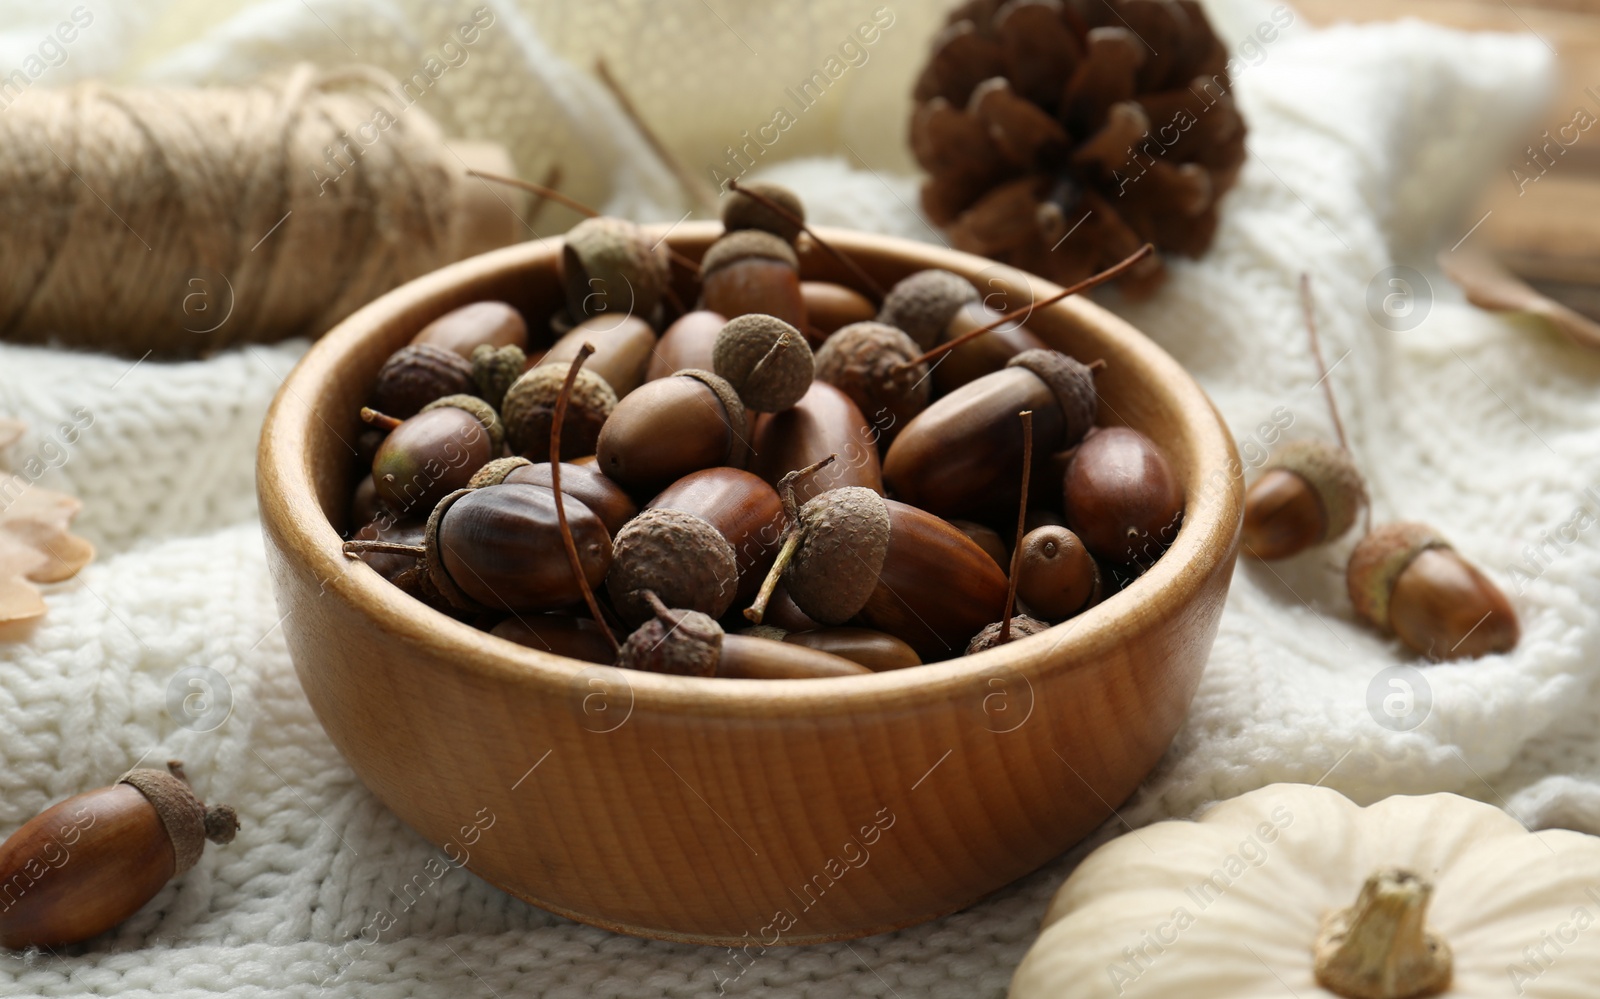 Photo of Acorns in wooden bowl on white knitted fabric